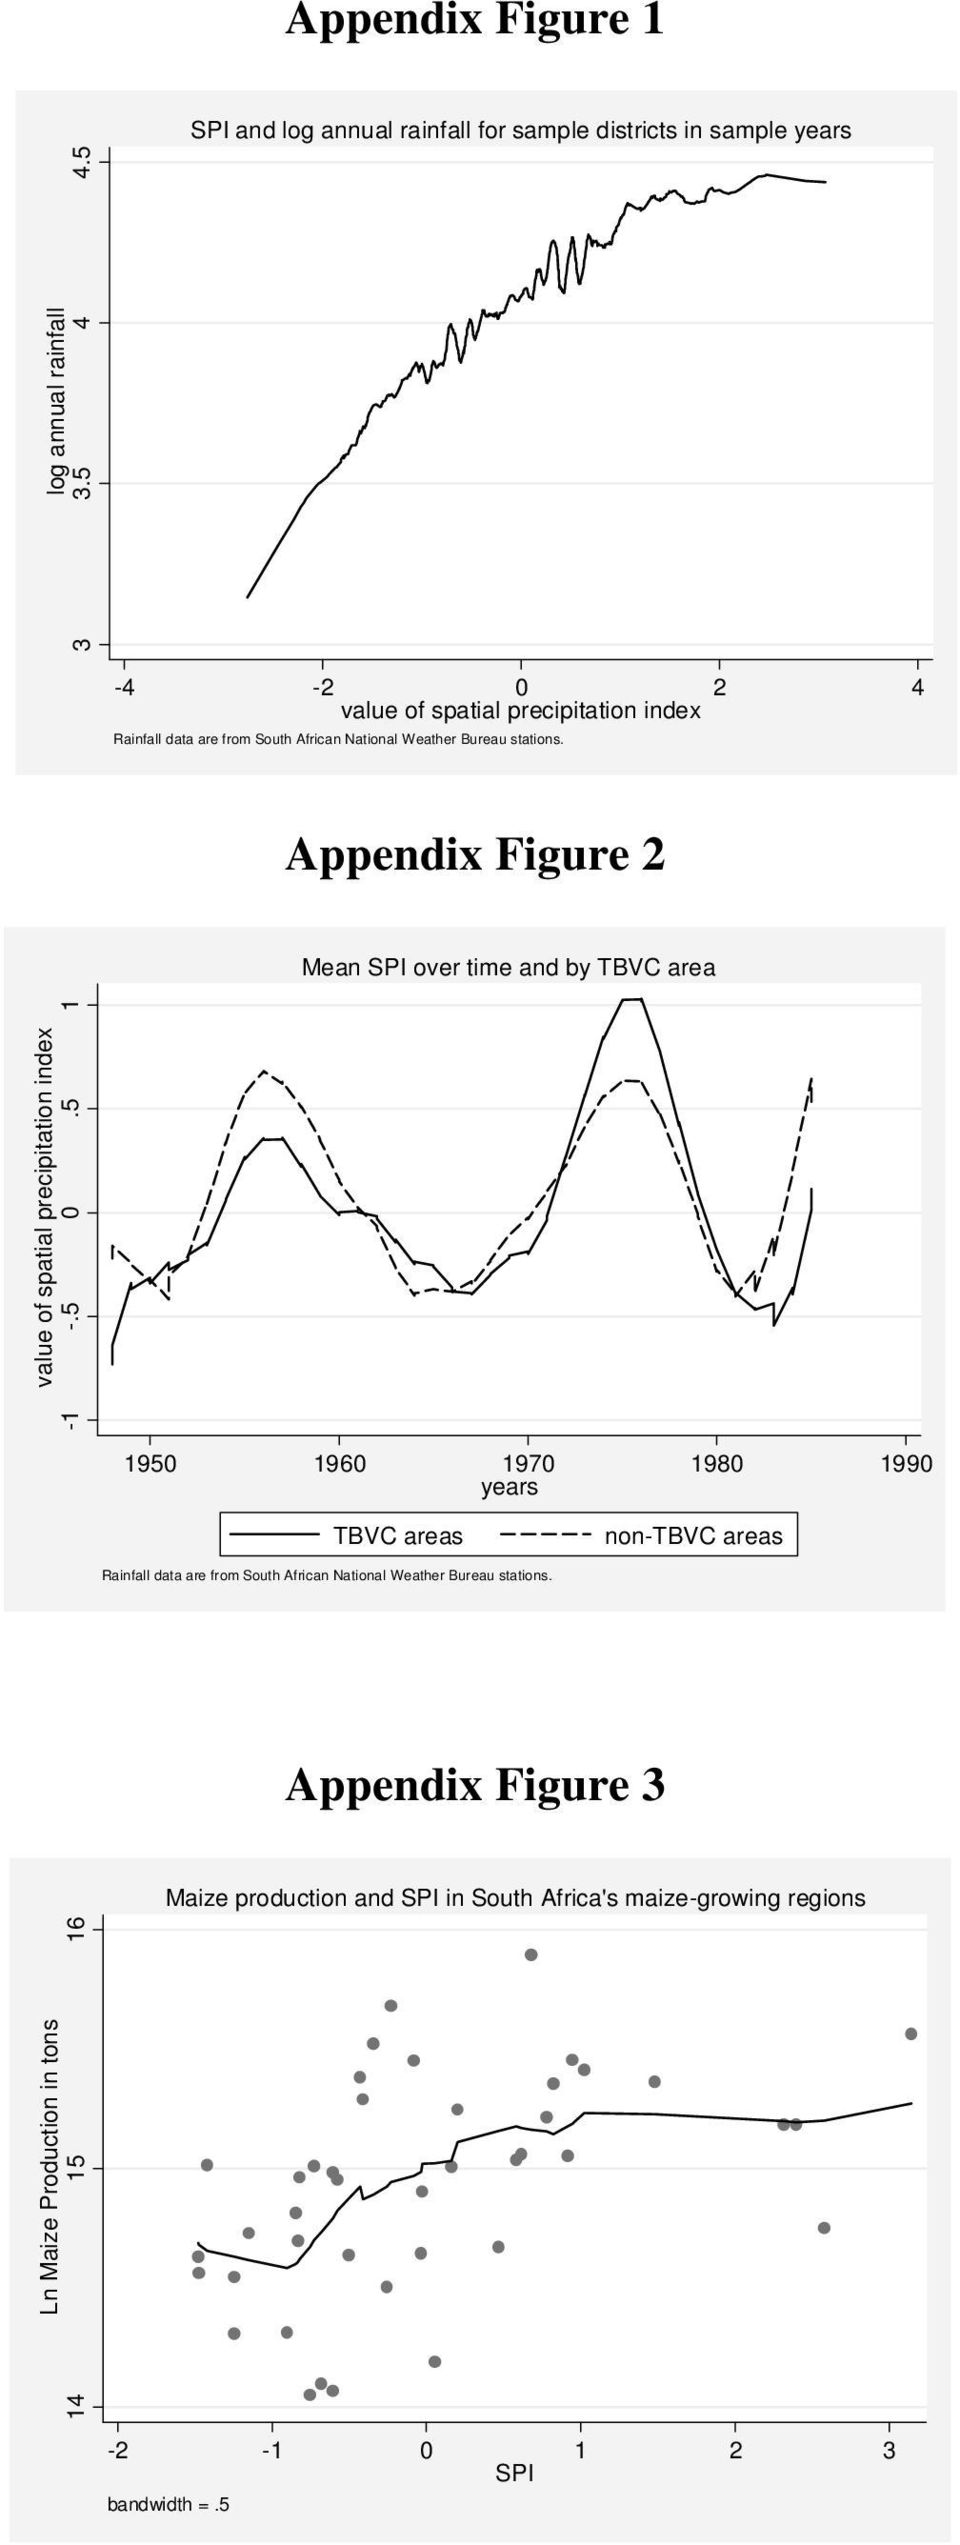 National Weather Bureau stations. Appendix Figure 2 Mean SPI over time and by TBVC area value of spatial precipitation index -1 -.5 0.